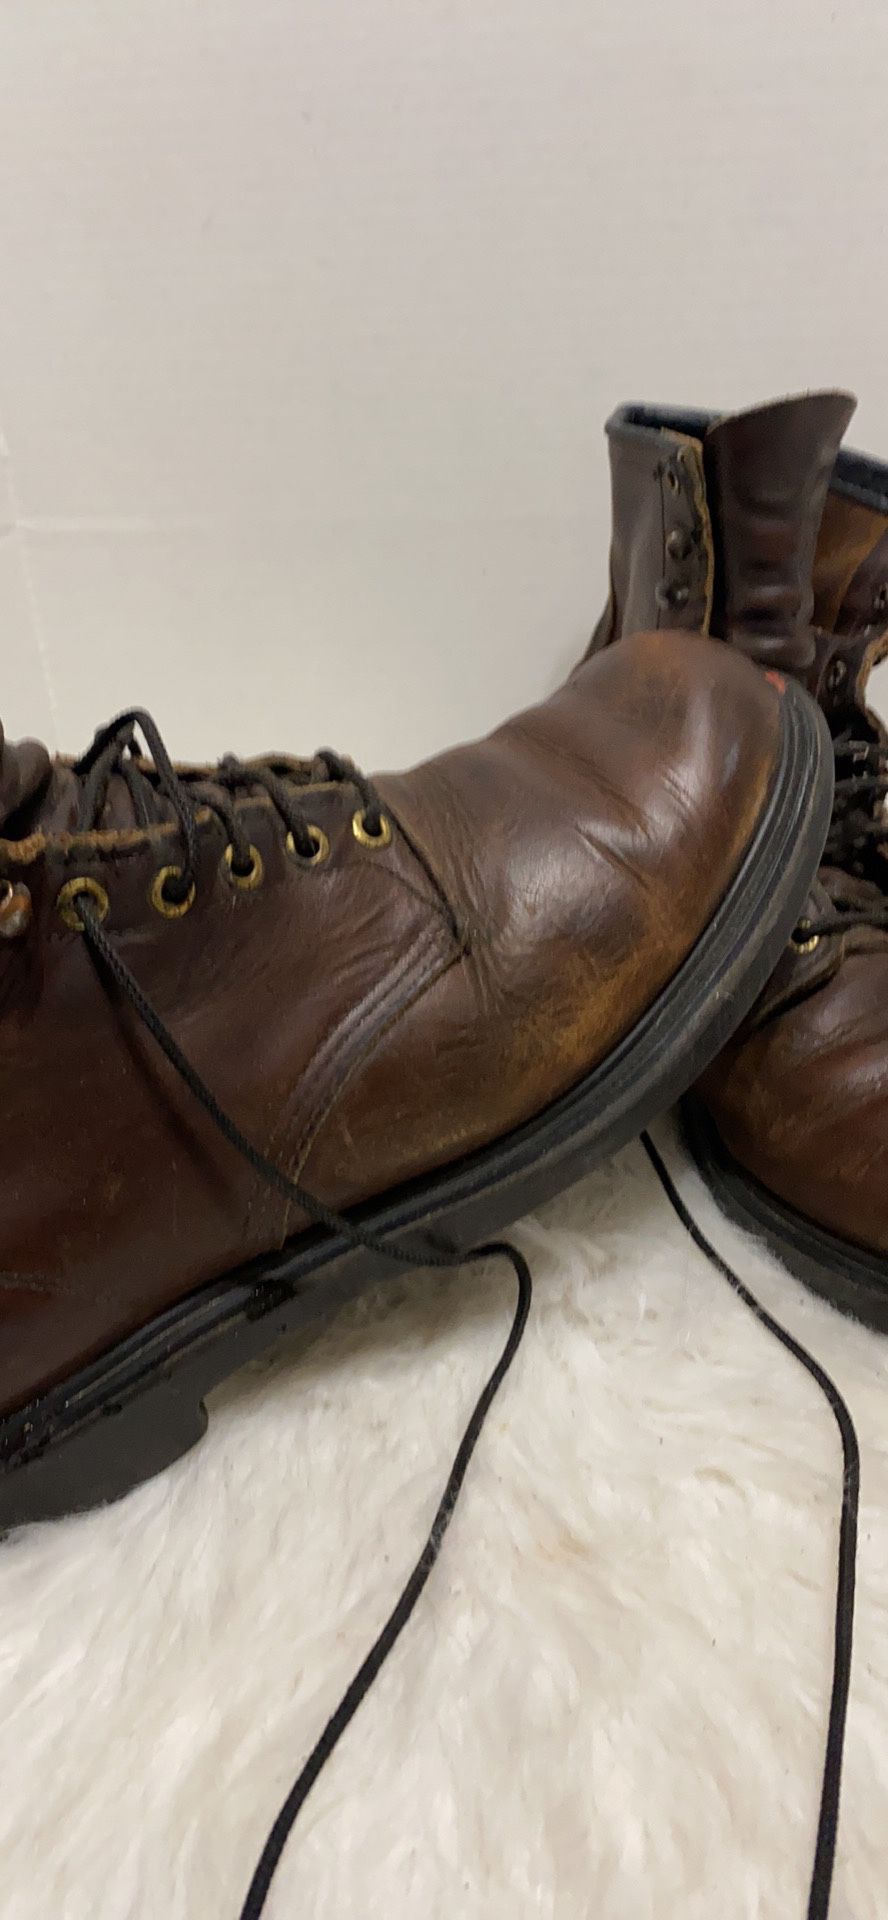 RED WING Supersole 953 Brown Leather Lace Up Ankle Work Boots Men's 11 USA!!!